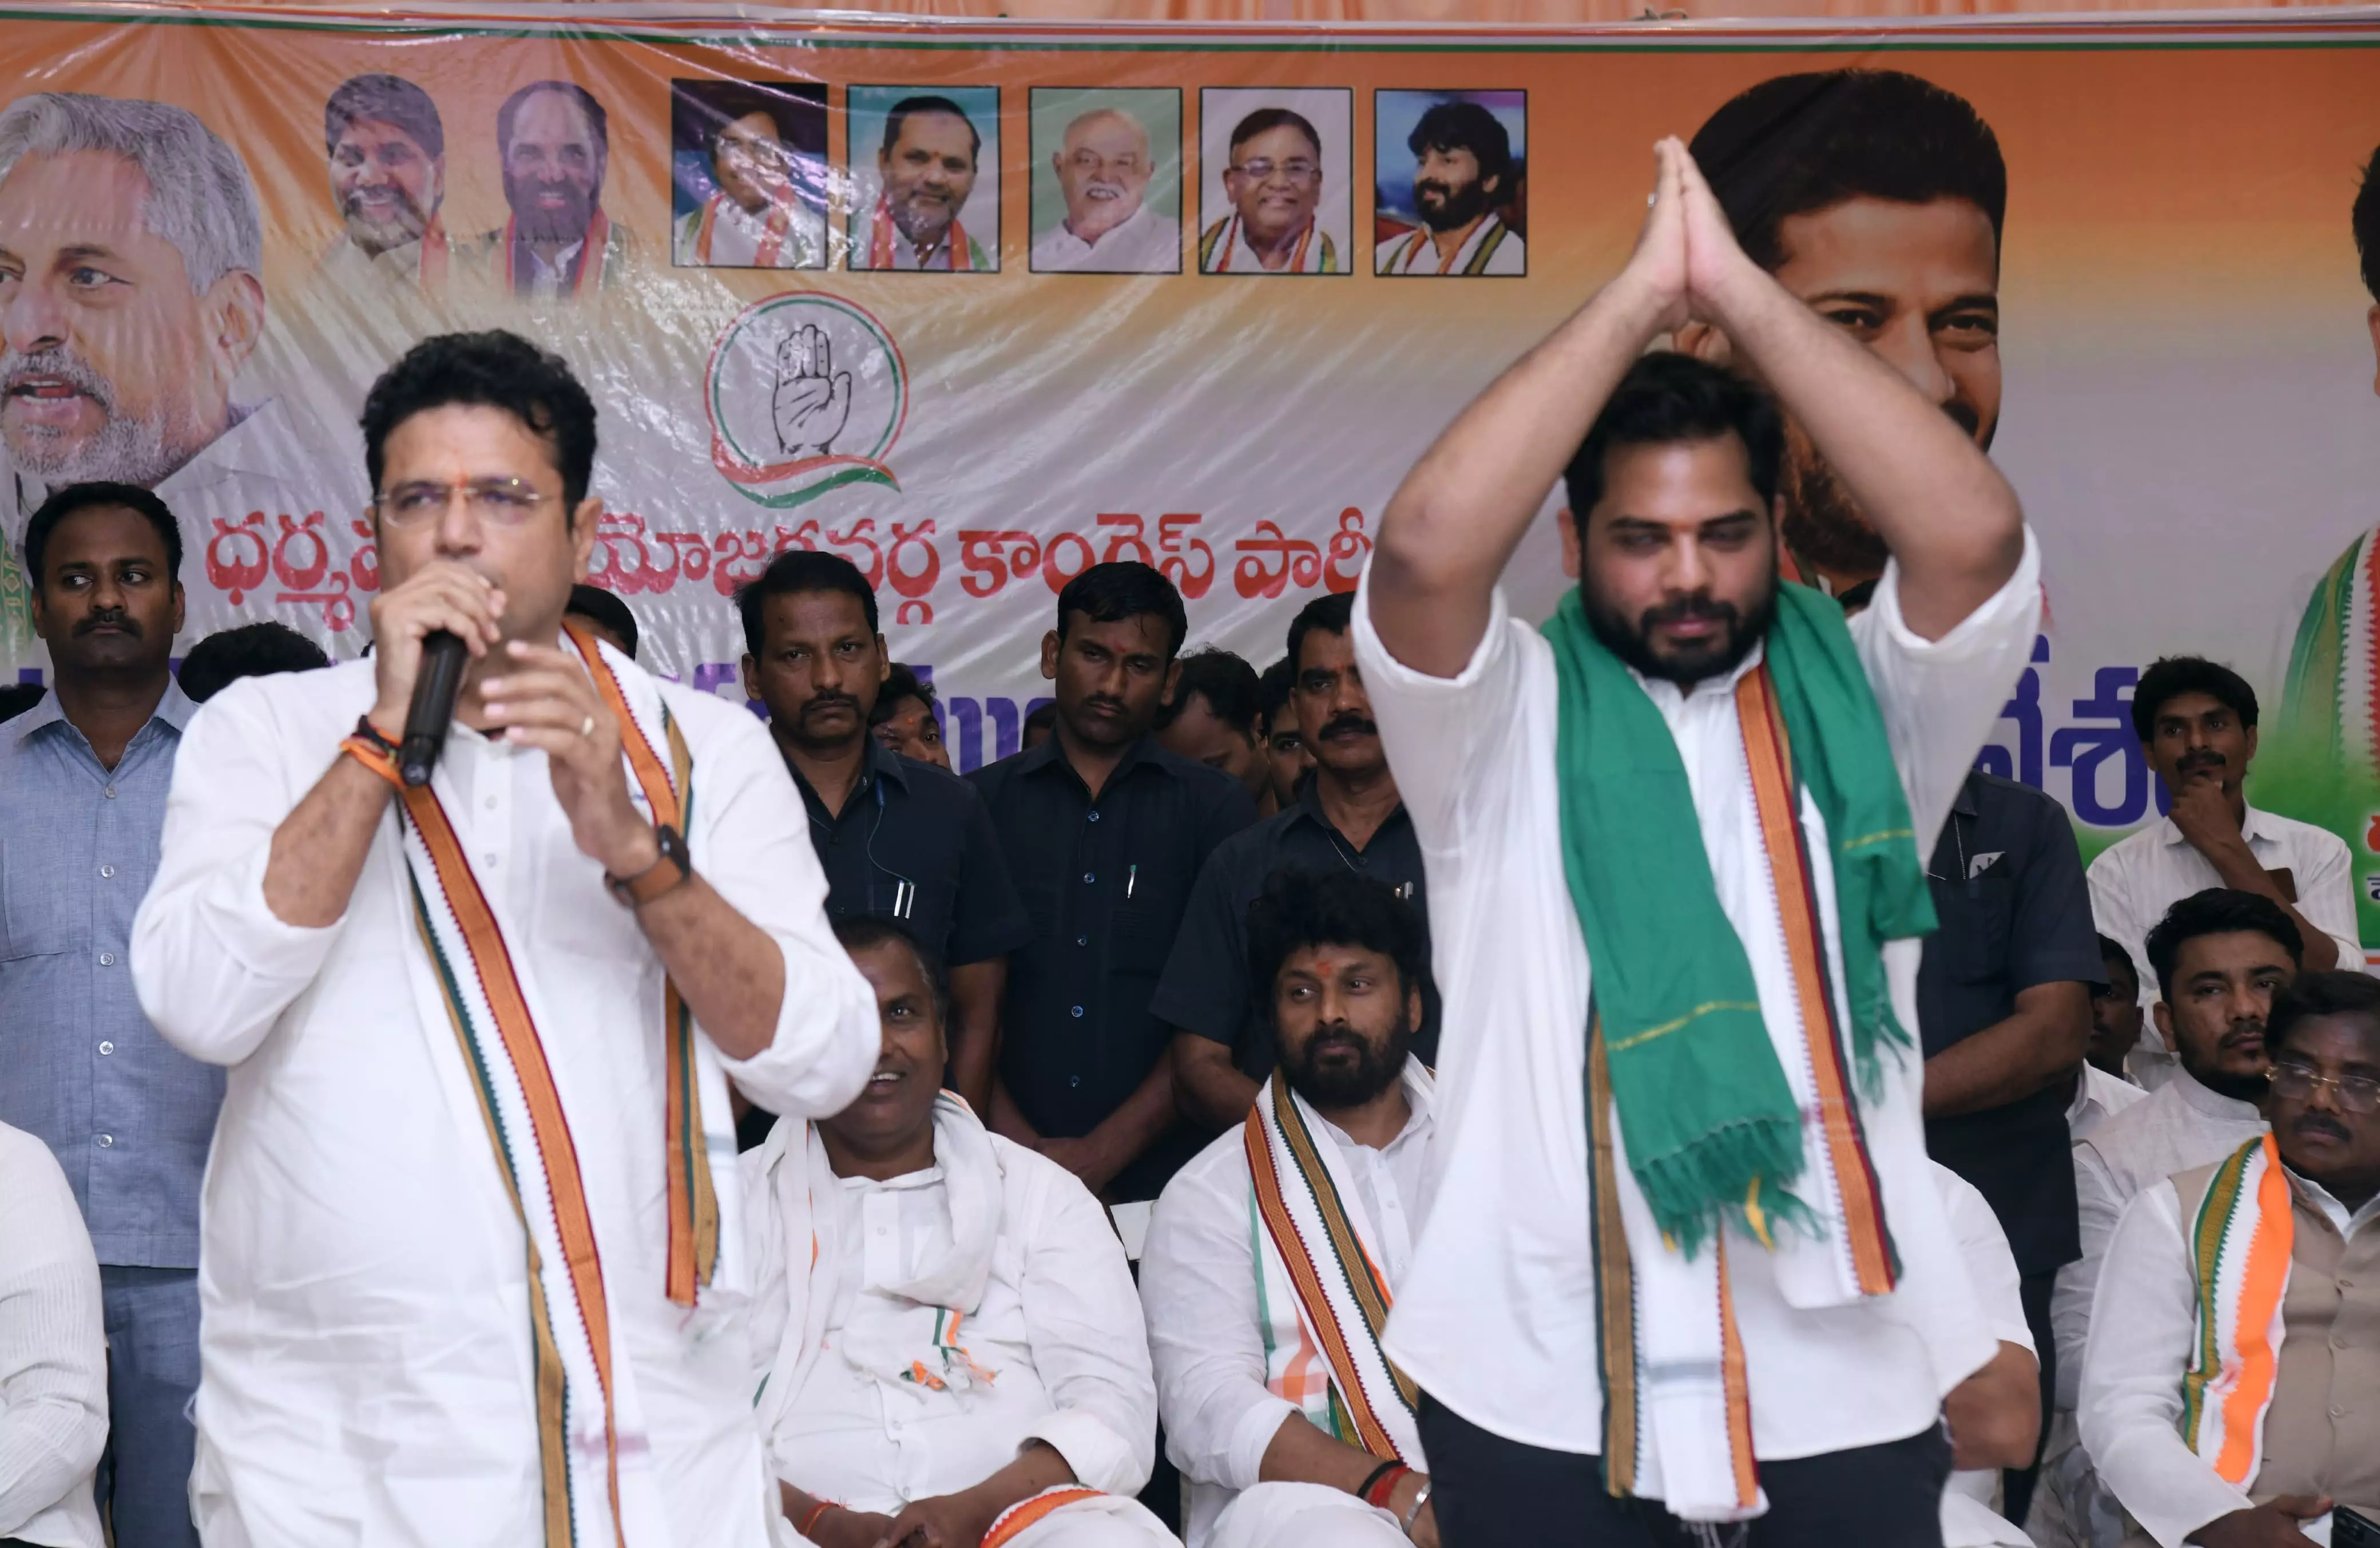 Cong. Will Fulfil All Promises, Says Sridhar